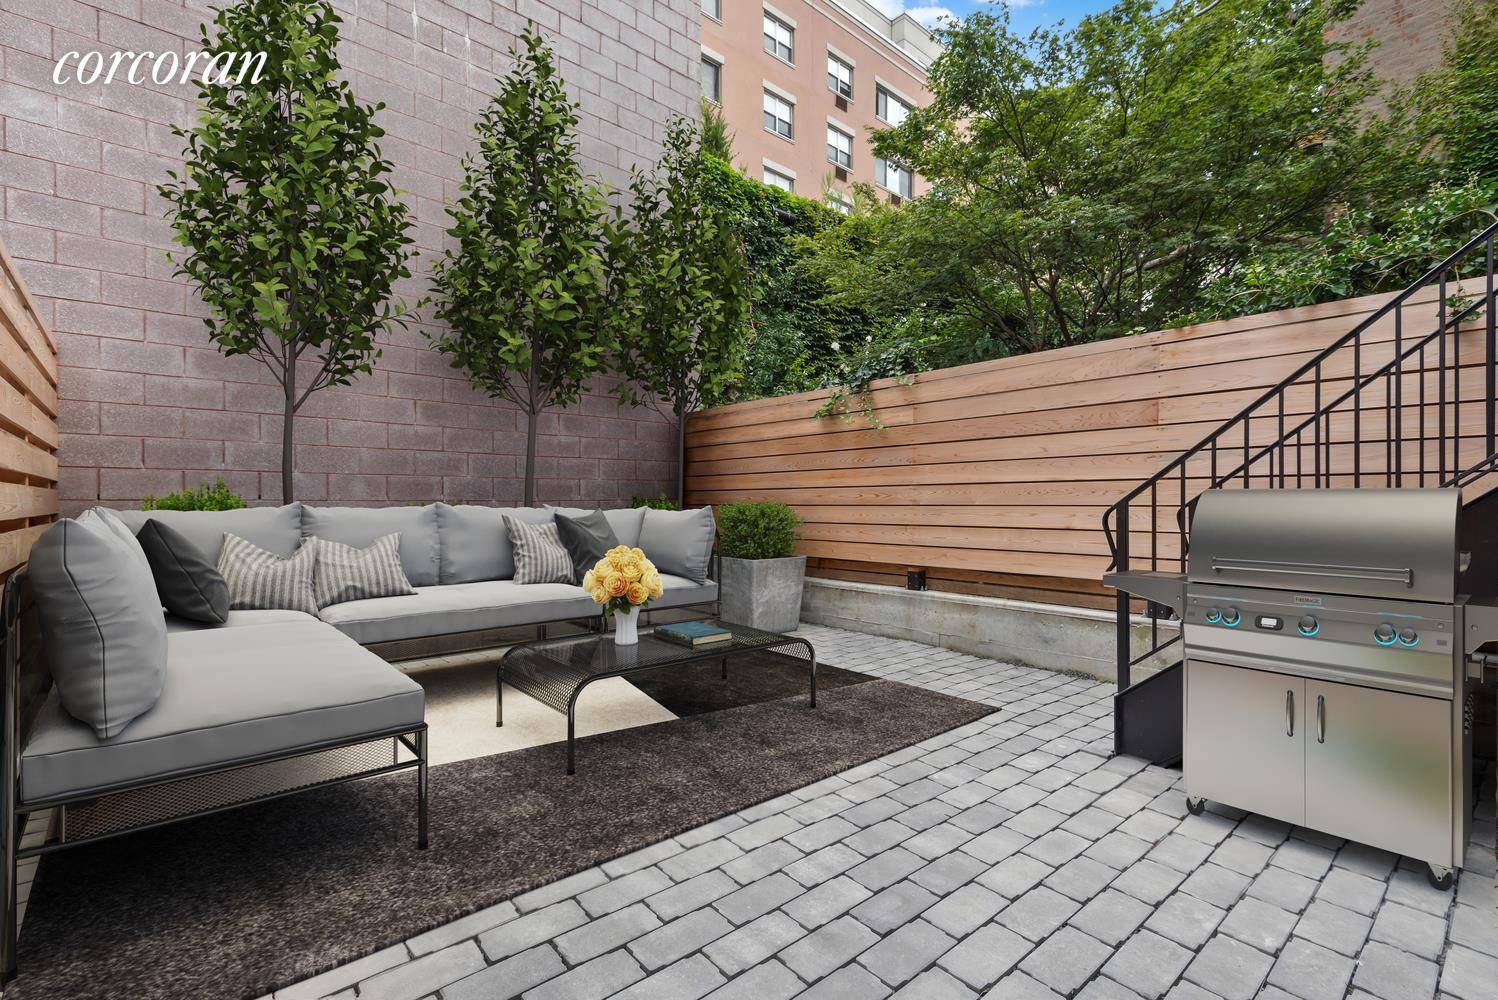 Introducing 319 State Street 2 This brand new Four Bed Three and a half Bath home is the first residence to become available for lease at Eight on State, a ...